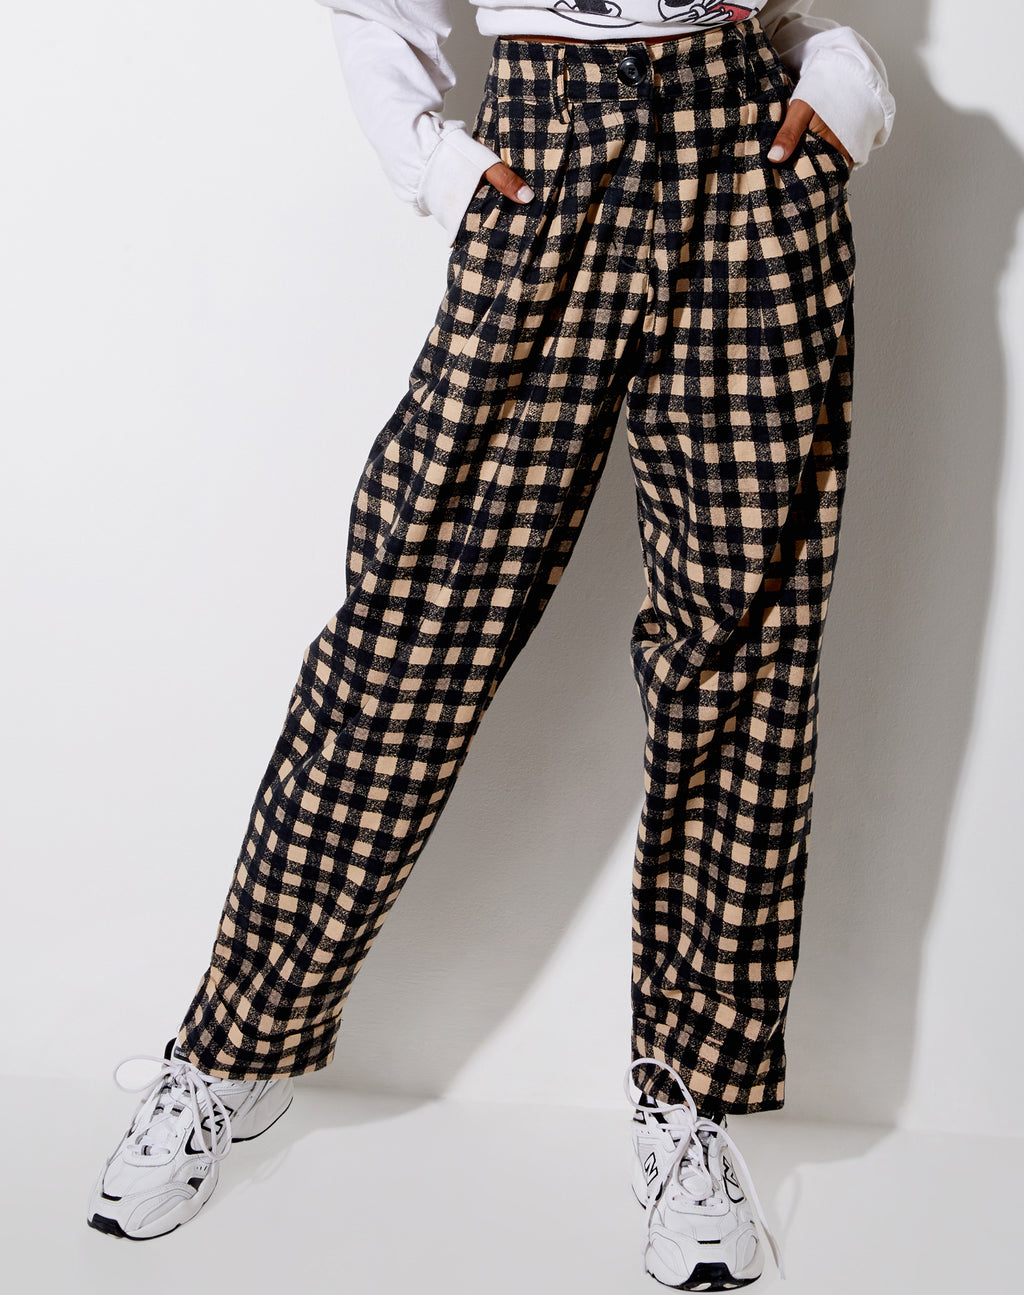 Misca Trouser in 90's Grunge Check